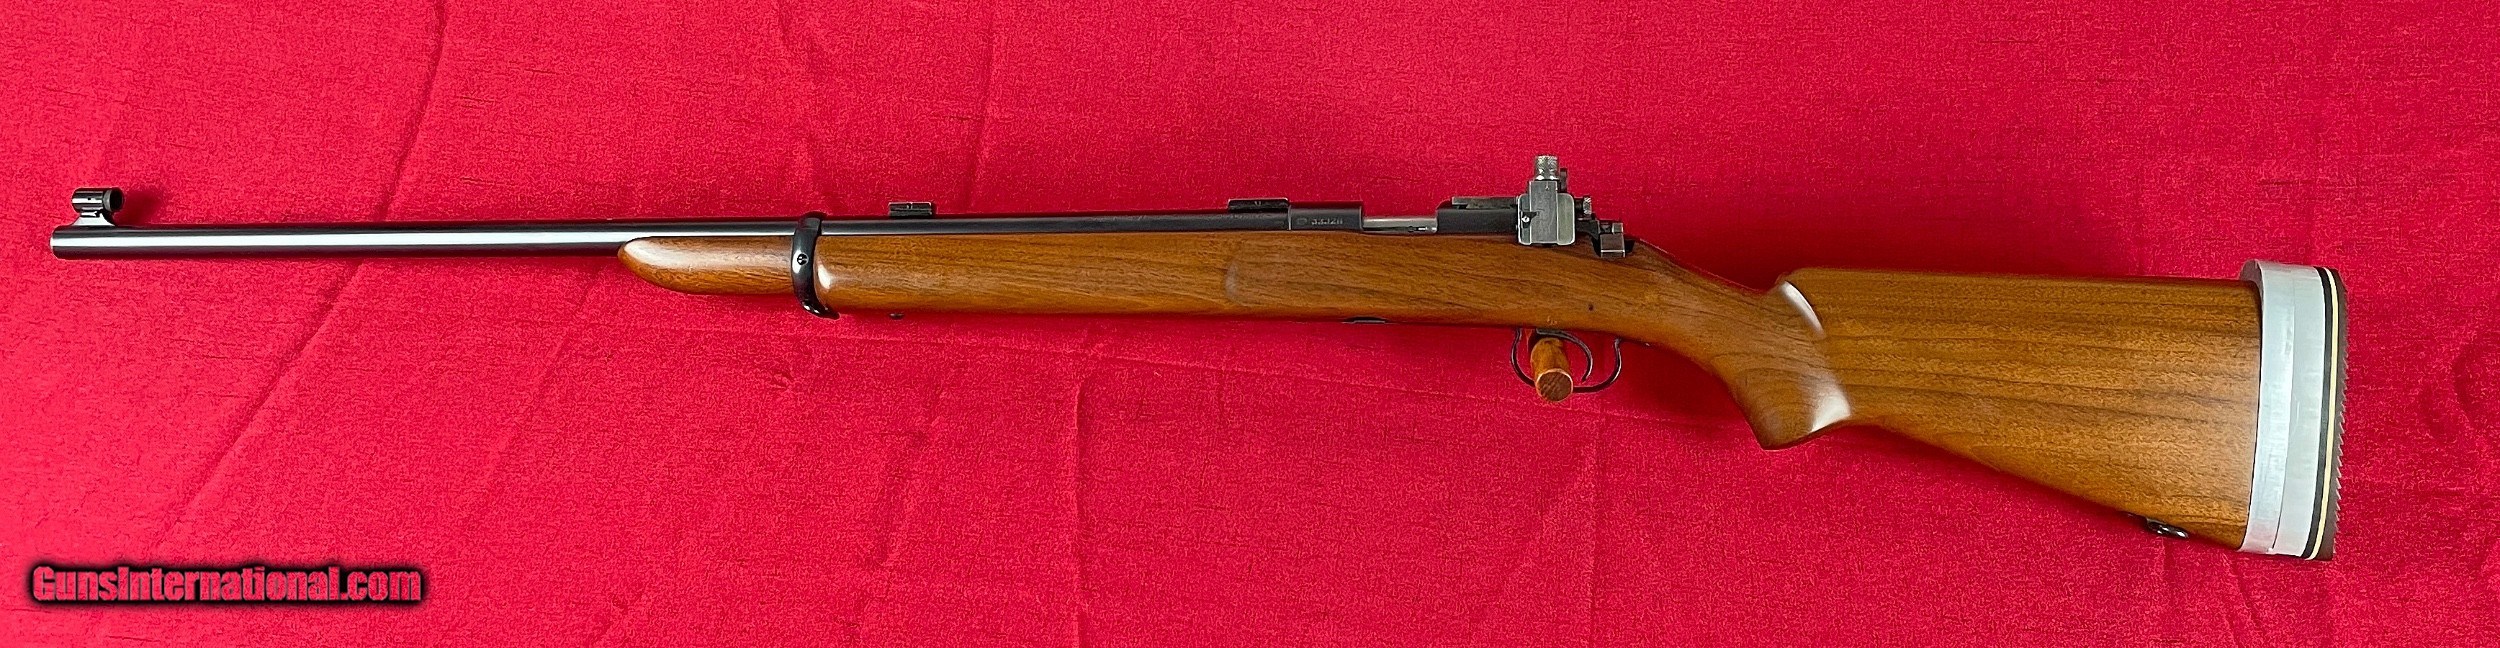 Winchester Model 52 Target rifles history and imagery